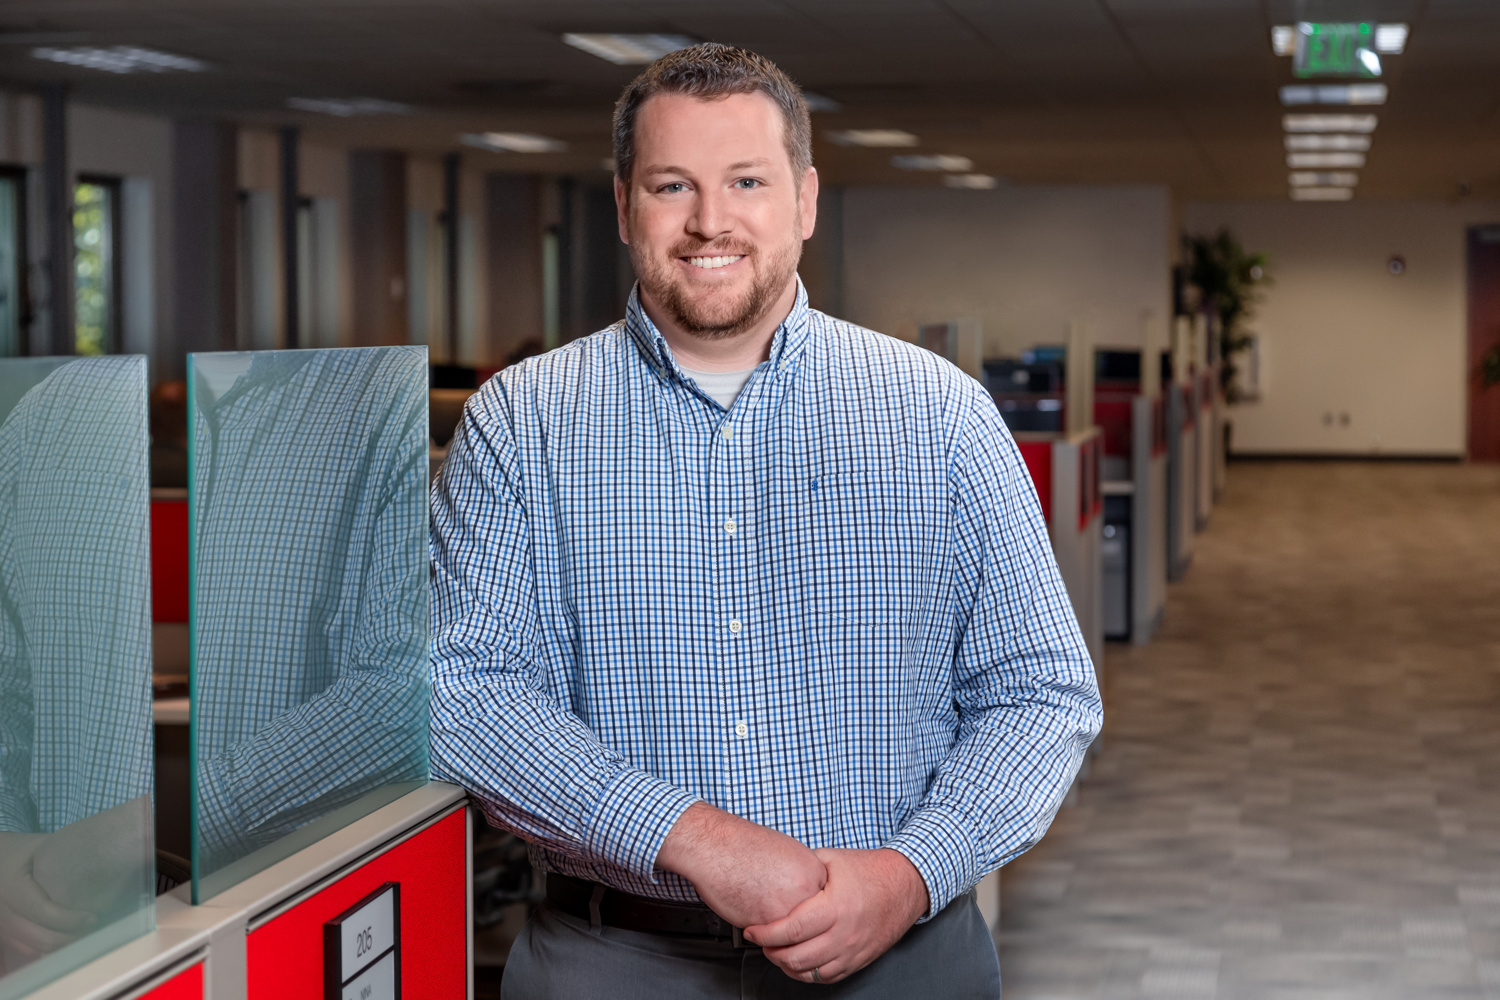 Drew oversees support for several of Railinc's critical industry products.